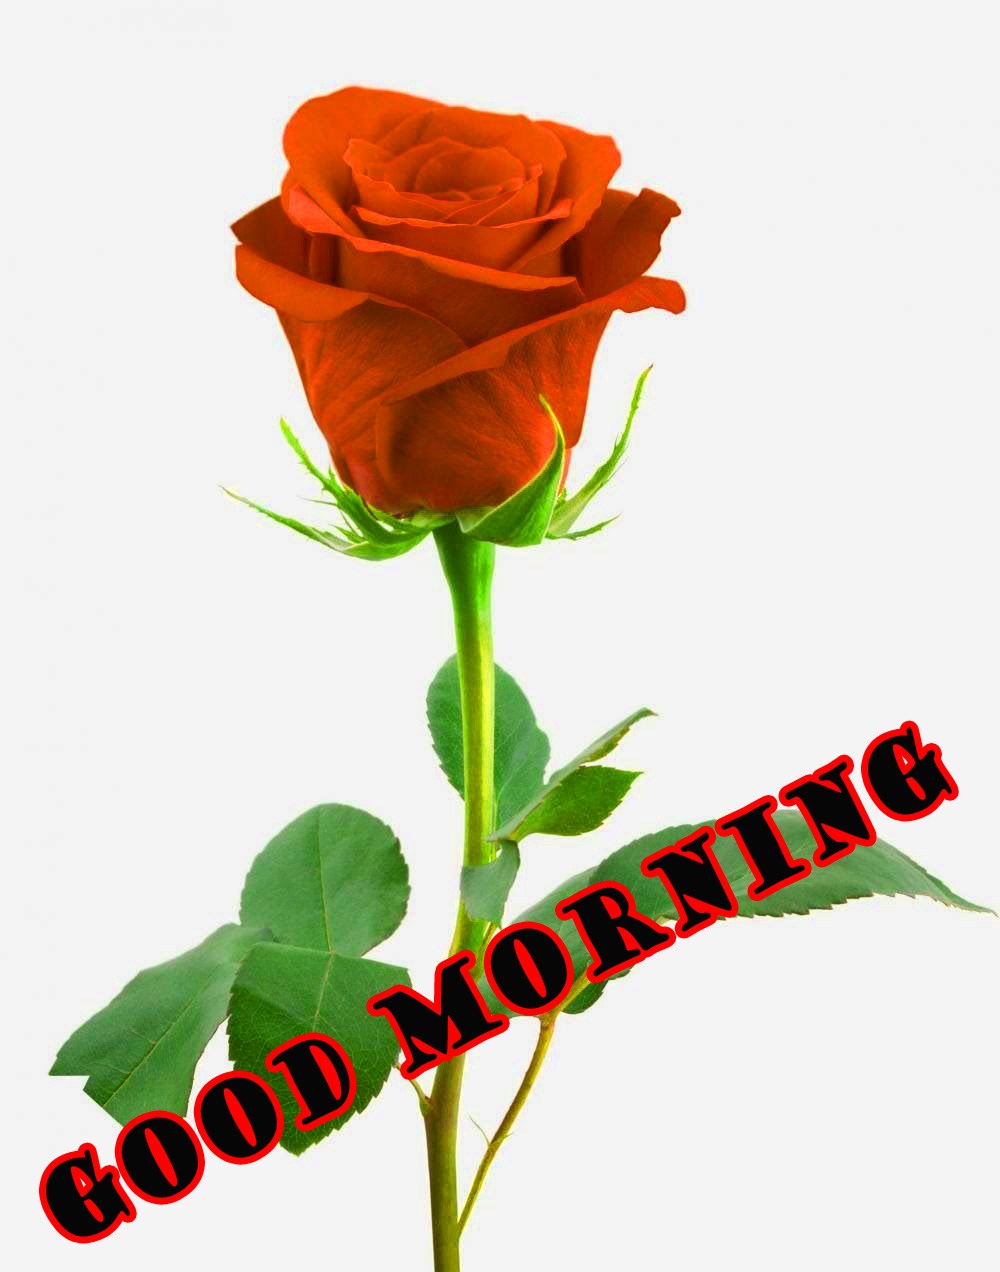 472 Good Morning Red Rose Images Wallpaper Pics For - Friend Rose Good Morning , HD Wallpaper & Backgrounds